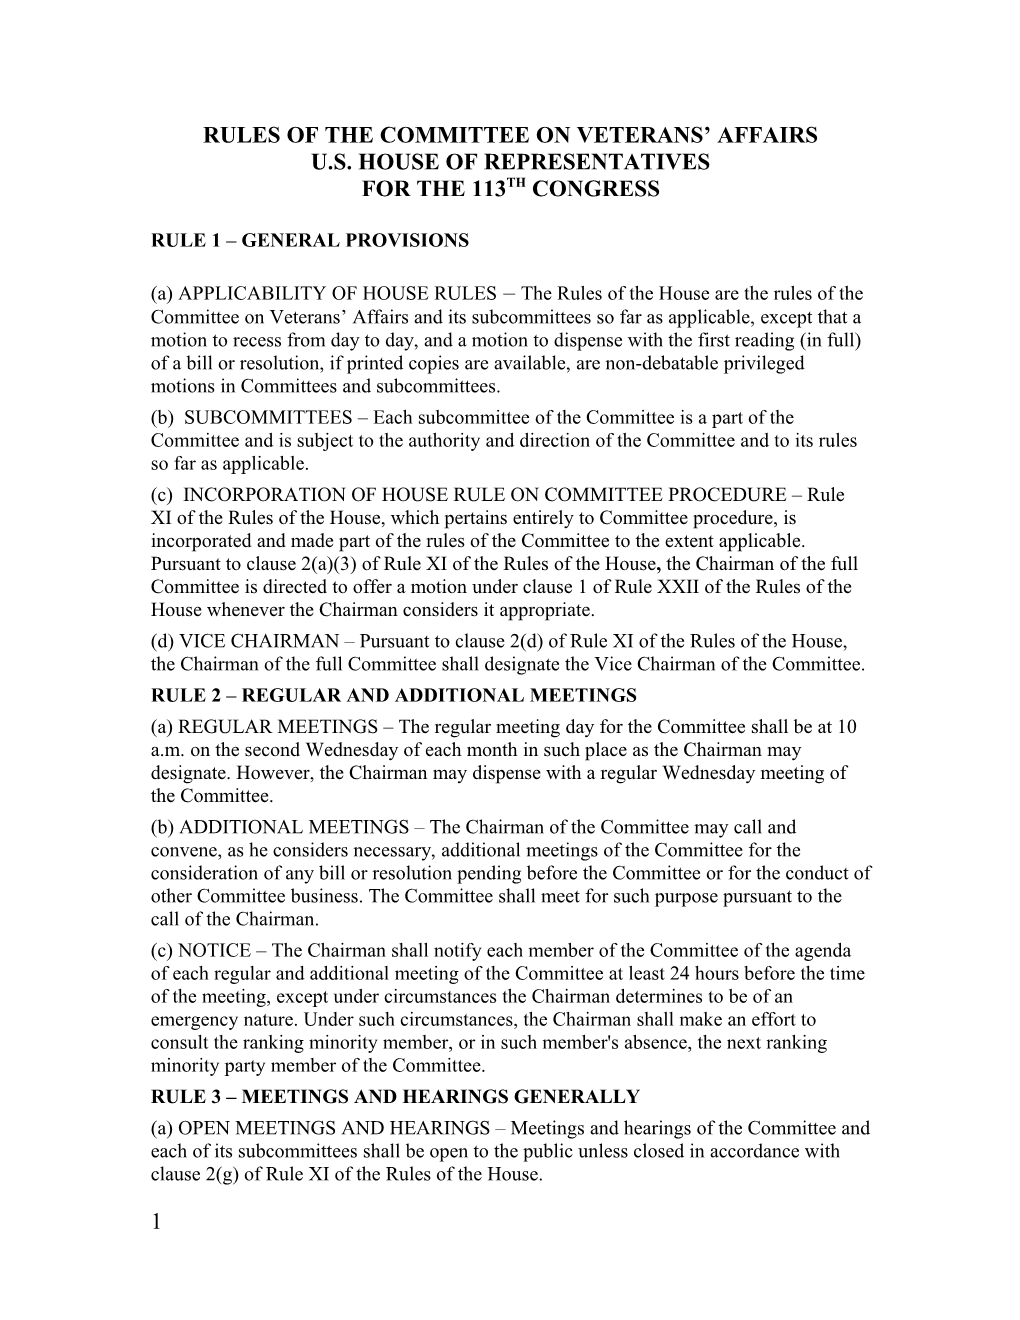 Rules of the Committee on Veterans Affairs